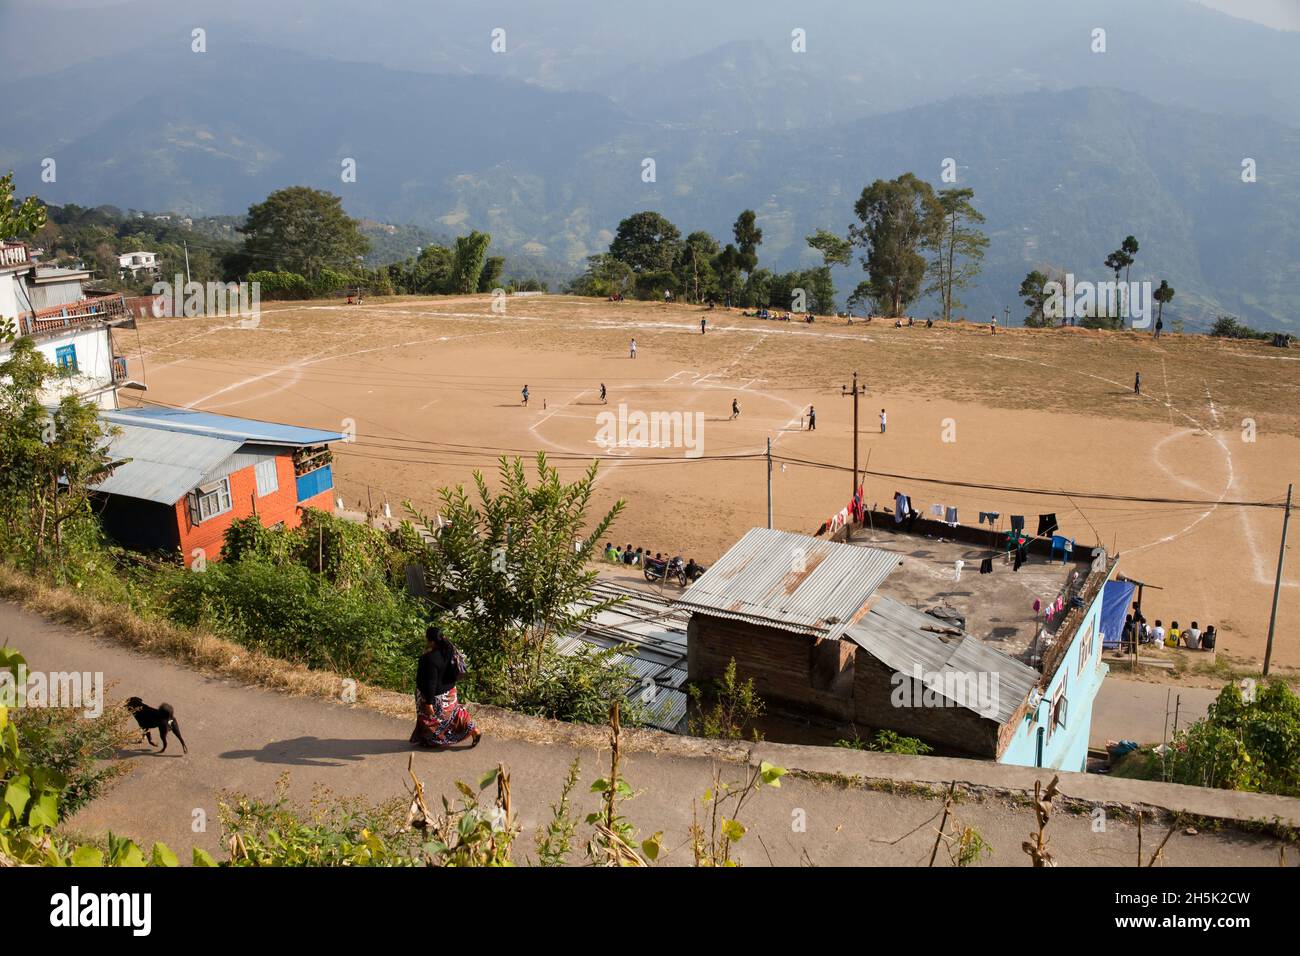 A soccer field cut right into the side of the mountains entertains Ilam youth. Stock Photo